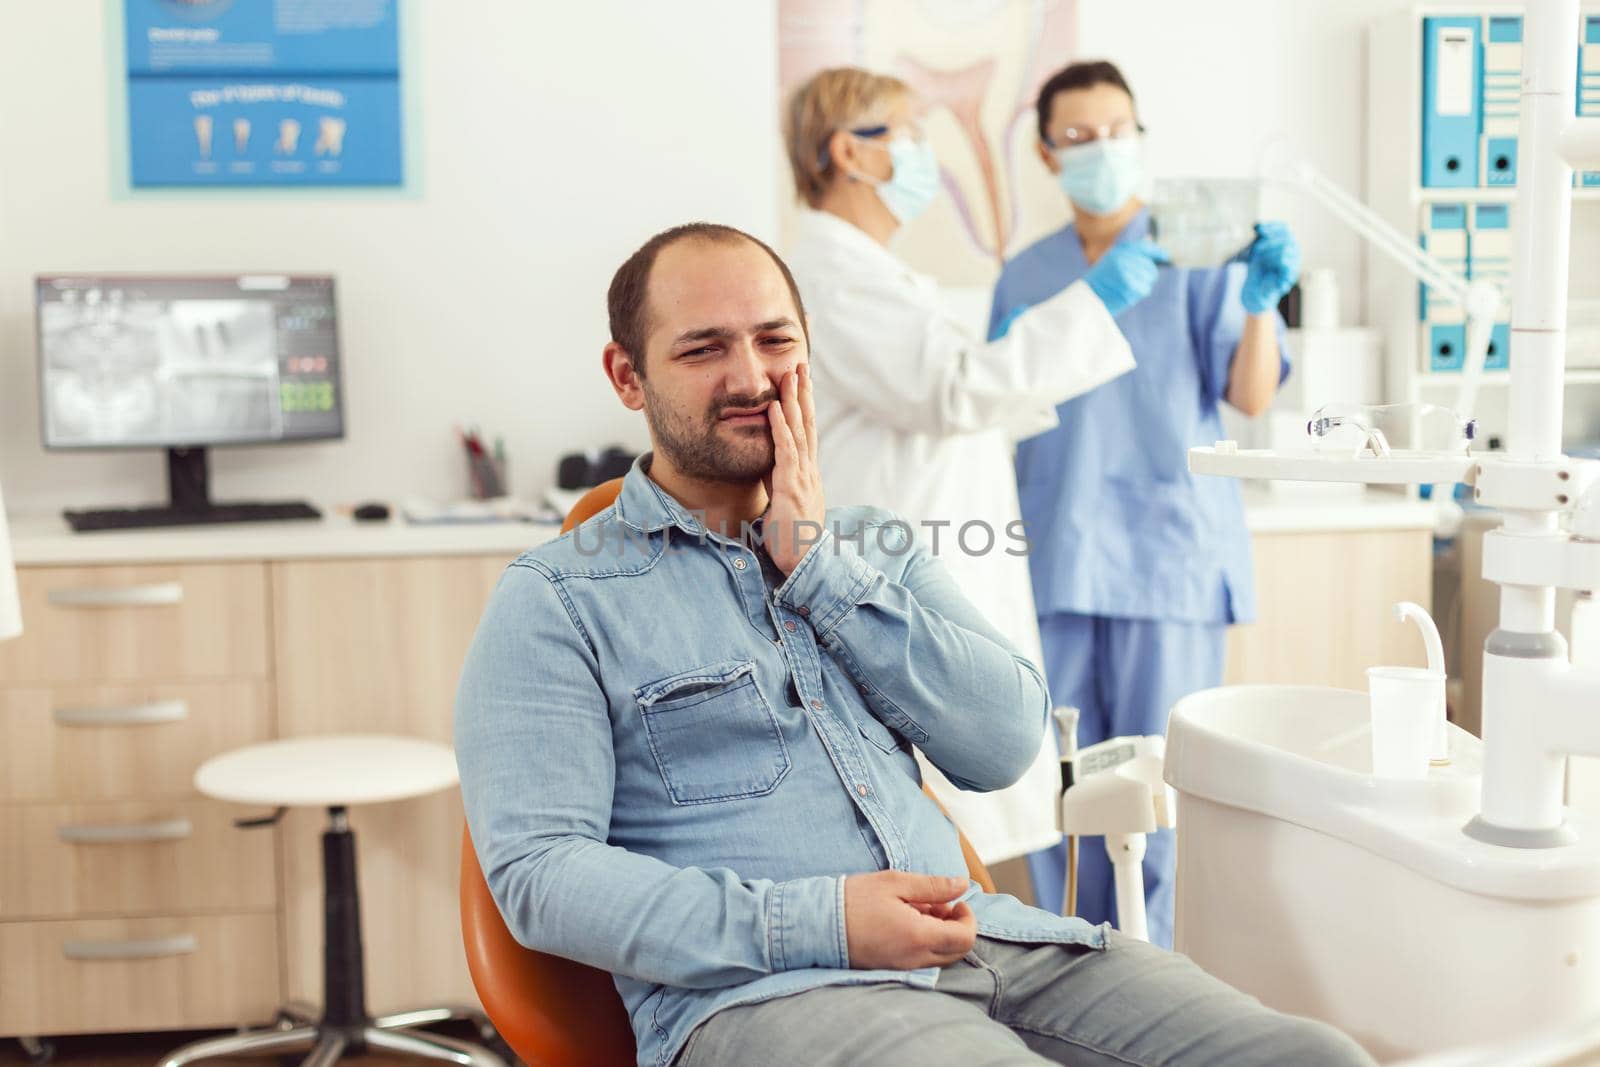 Sick patient complaining about teeth pain while waiting for dentists doctors by DCStudio